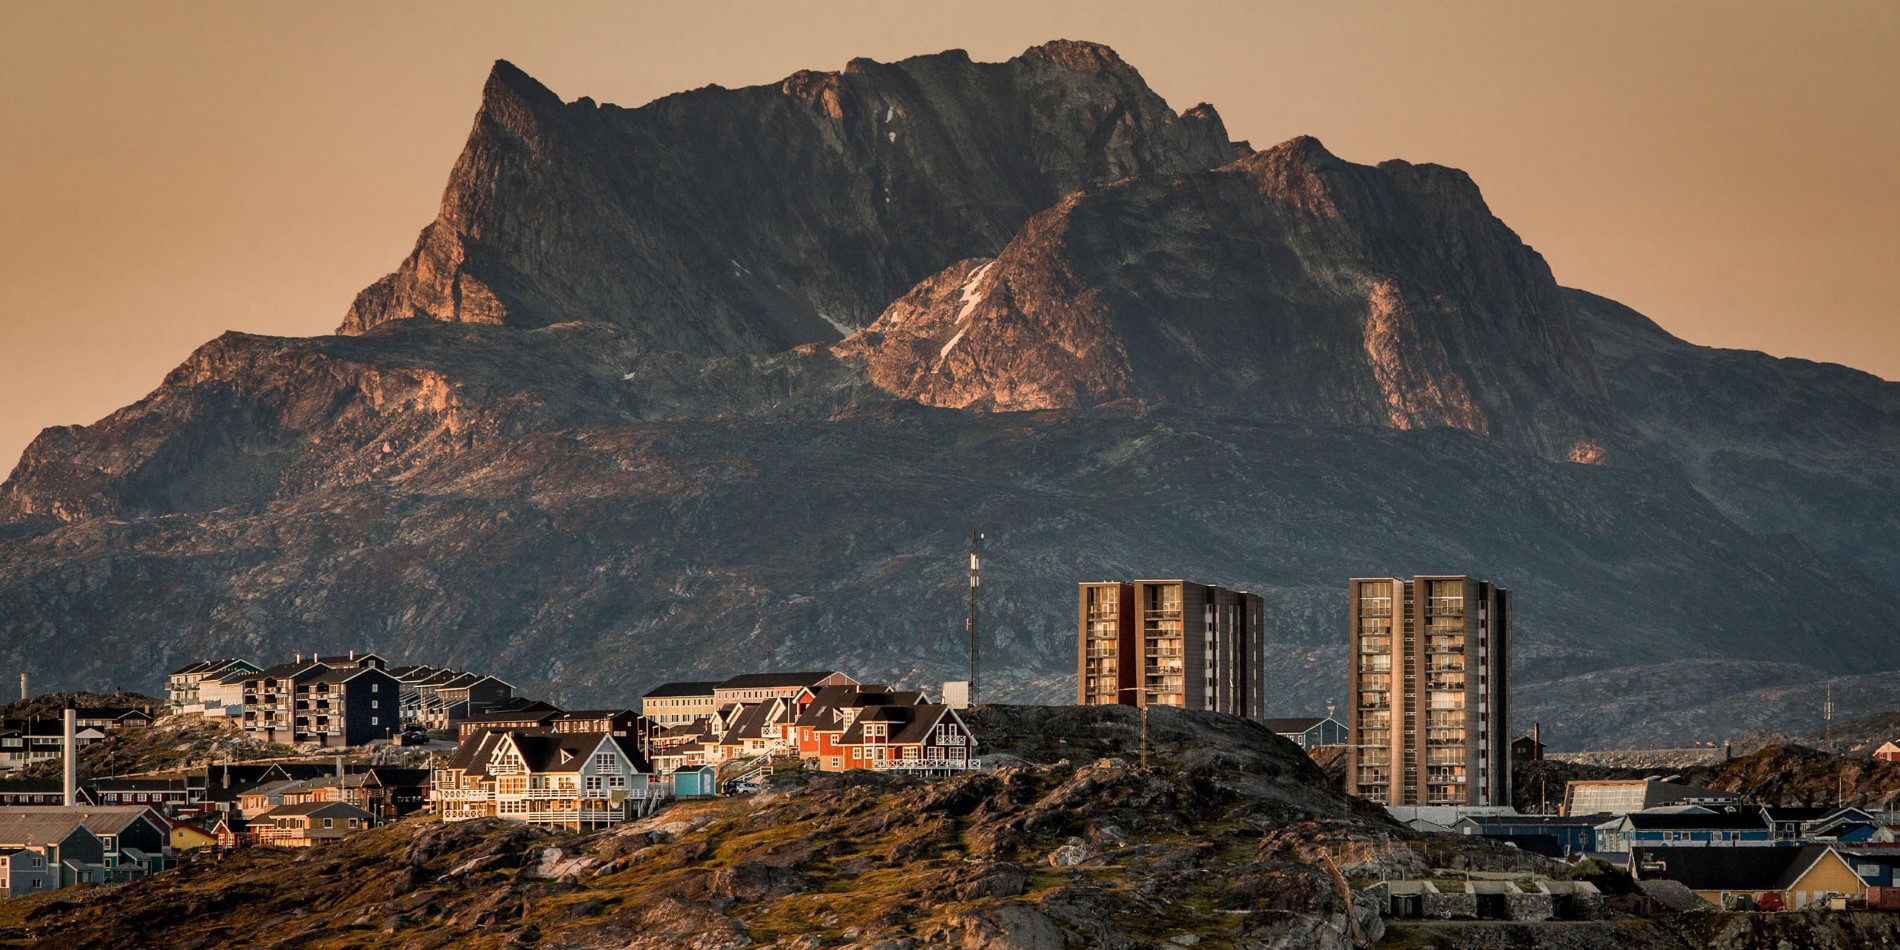 2500x1250_Nuuk-with-the-mountain-Sermitsiaq-in-the-background_©-Visit-Greenland---Mads-Pihl.jpg